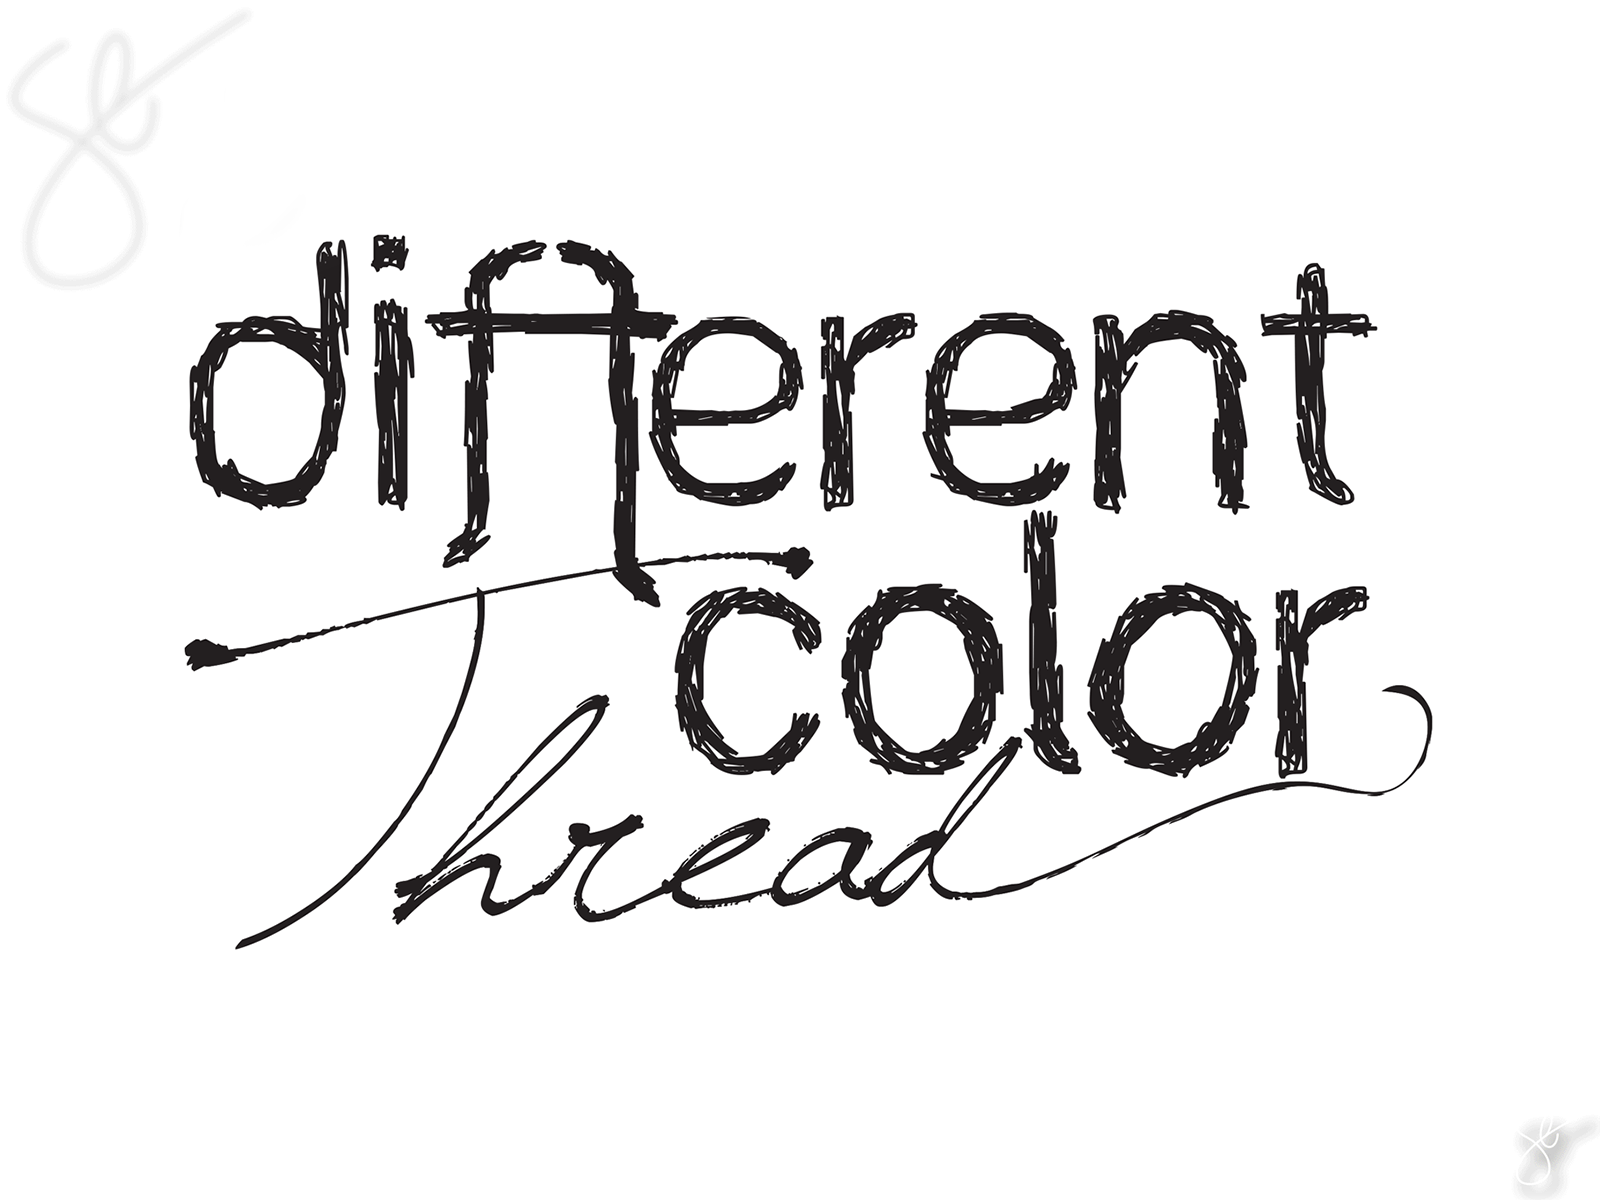 different-color-thread-by-steven-elmore-on-dribbble